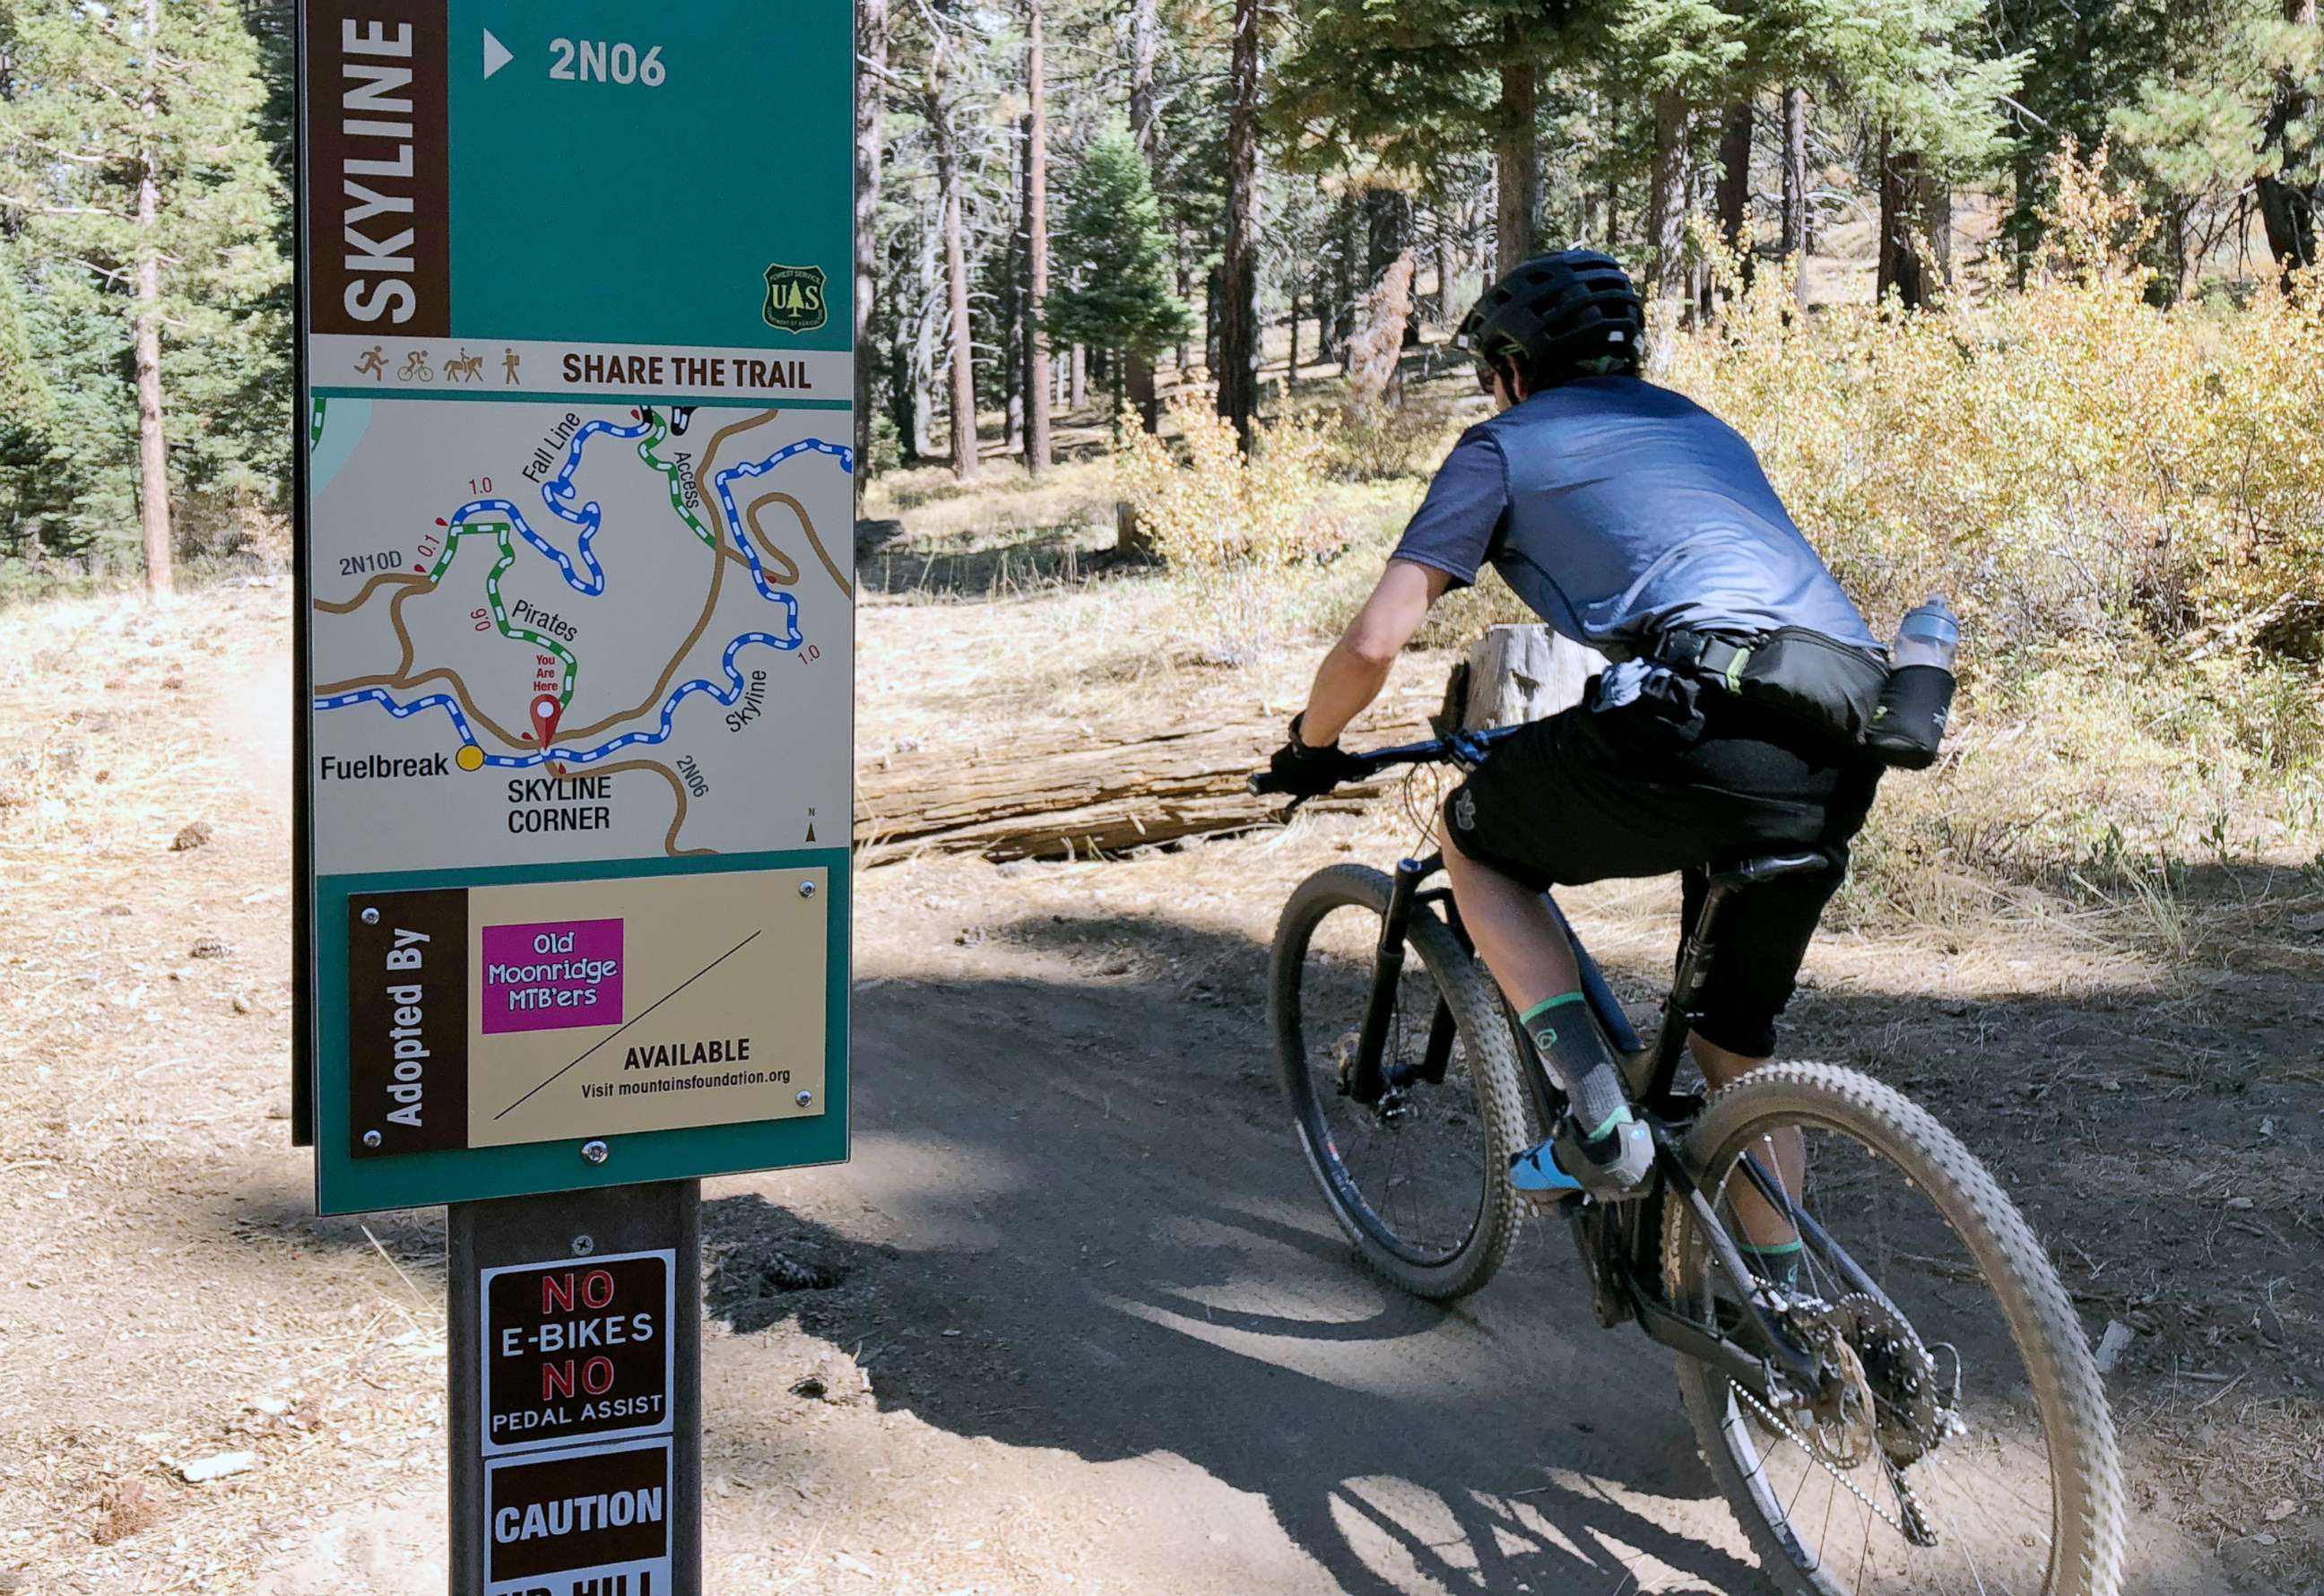 PHOTO: In this photo taken Sept. 23, 2018, a mountain biker pedals past a No E-bikes sign in the San Bernardino National Forest near Big Bear Lake, Calif.